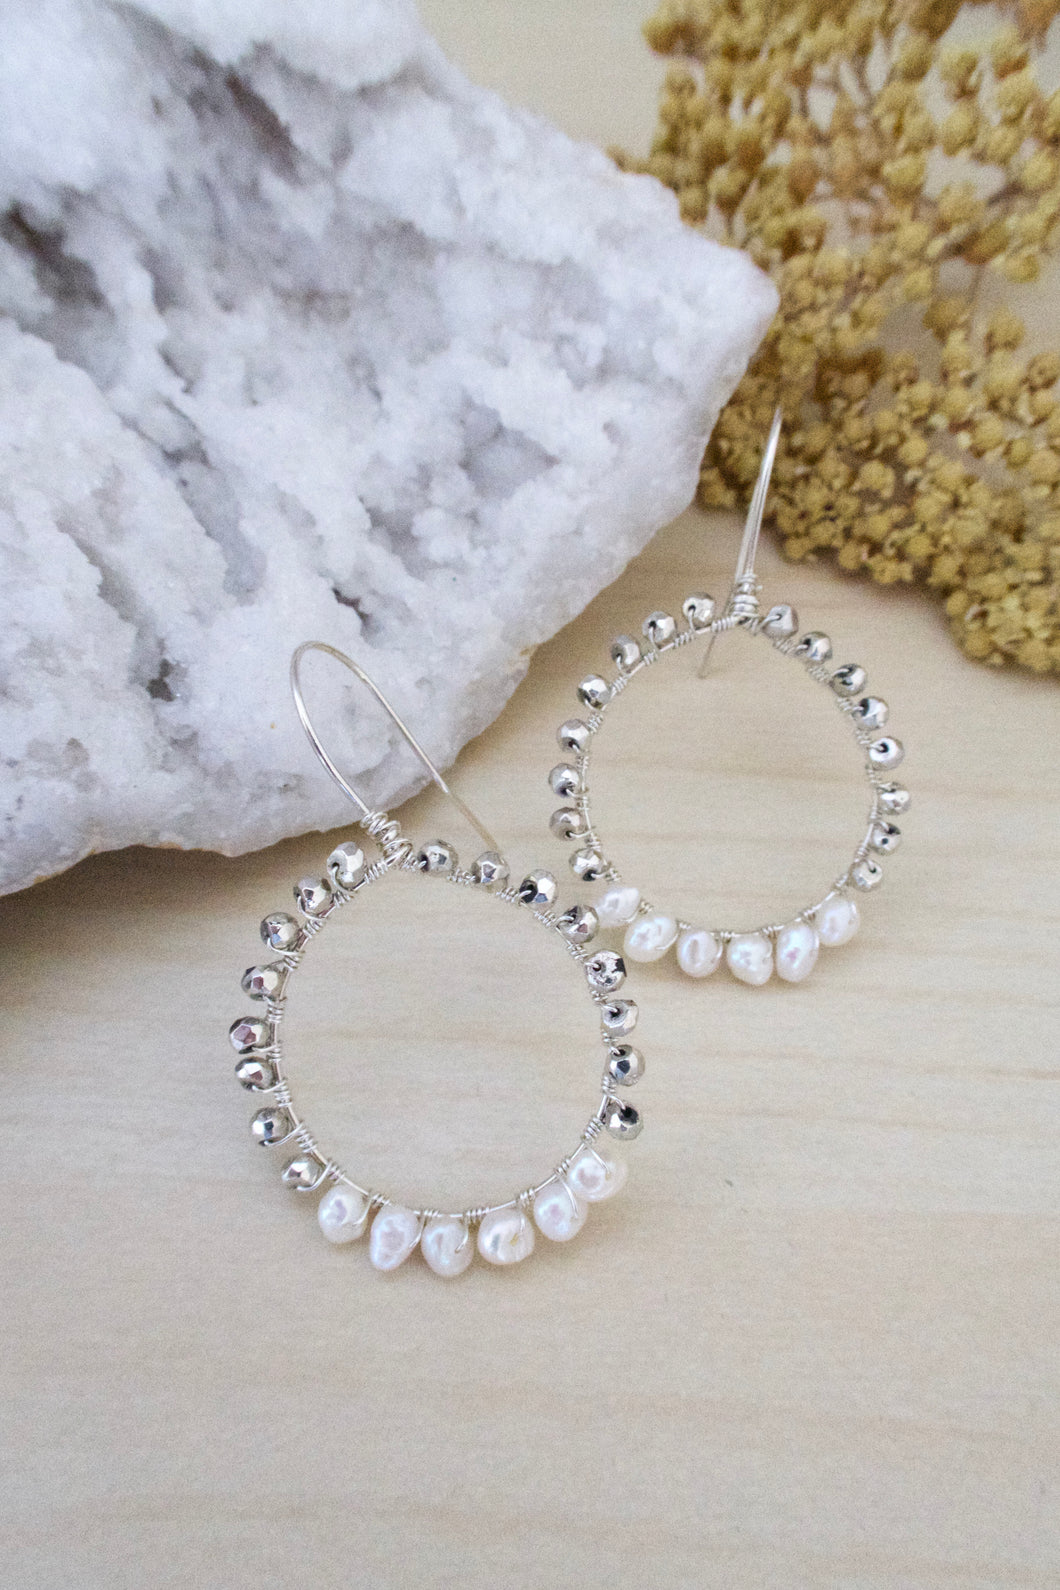 sterling silver hoop earrings with wire wrapped silver pyrite and white freshwater pearls 